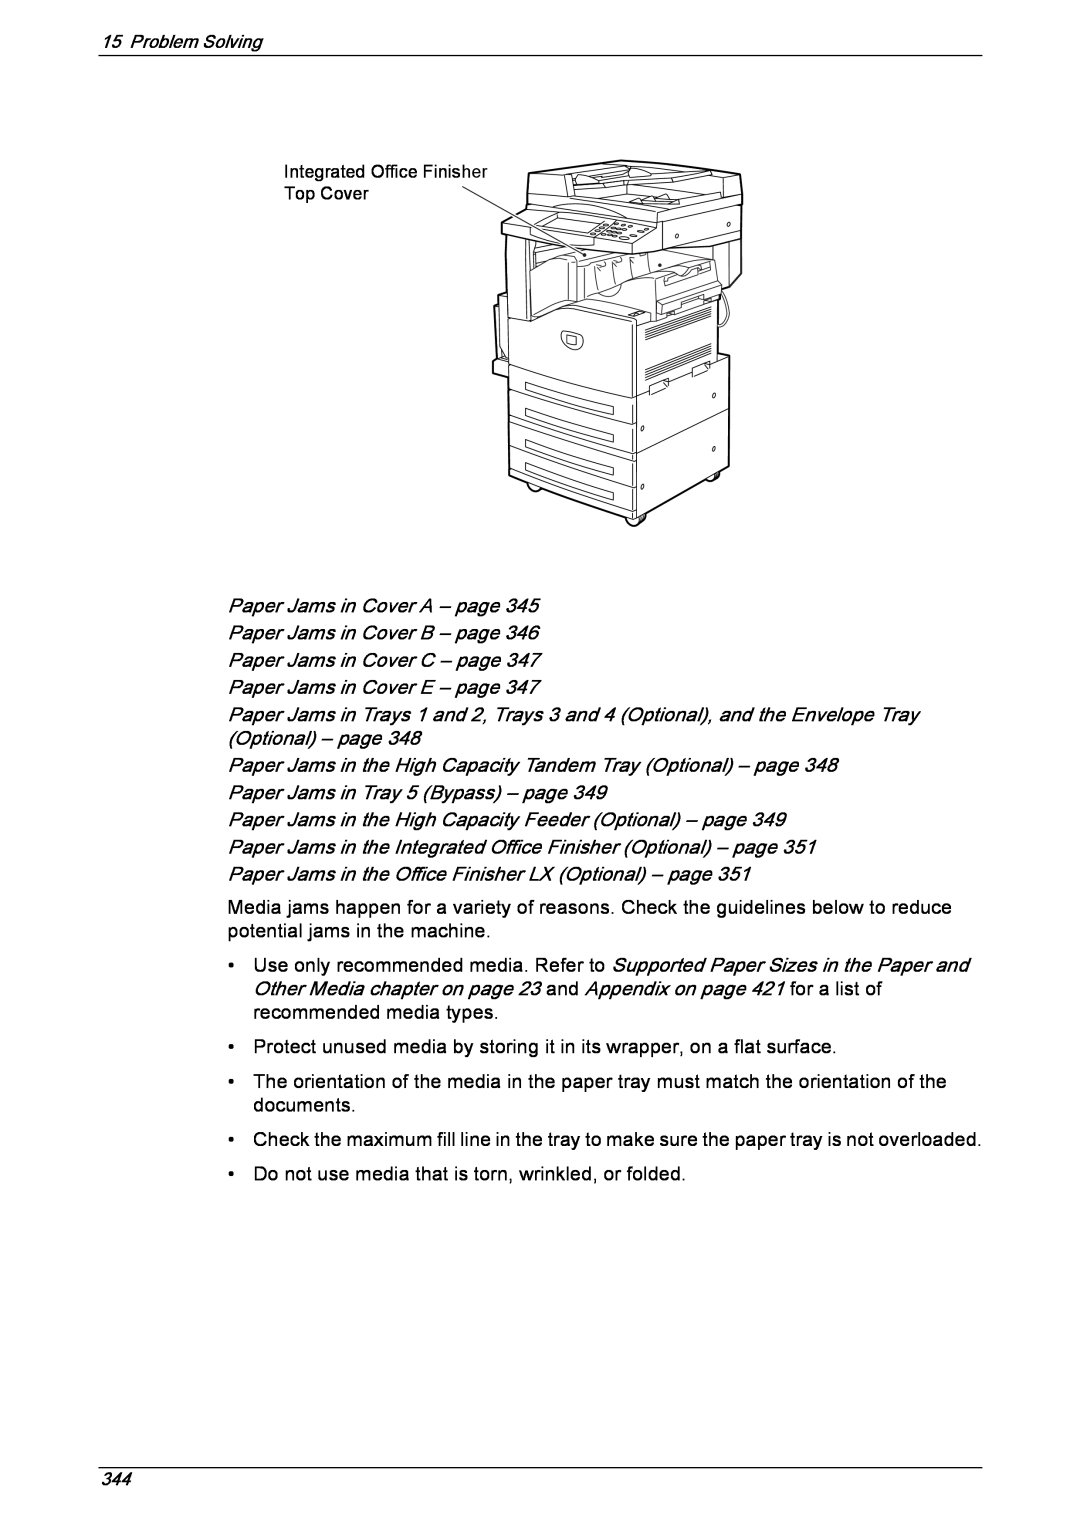 Xerox 5222 manual Problem Solving, Integrated Office Finisher Top Cover 